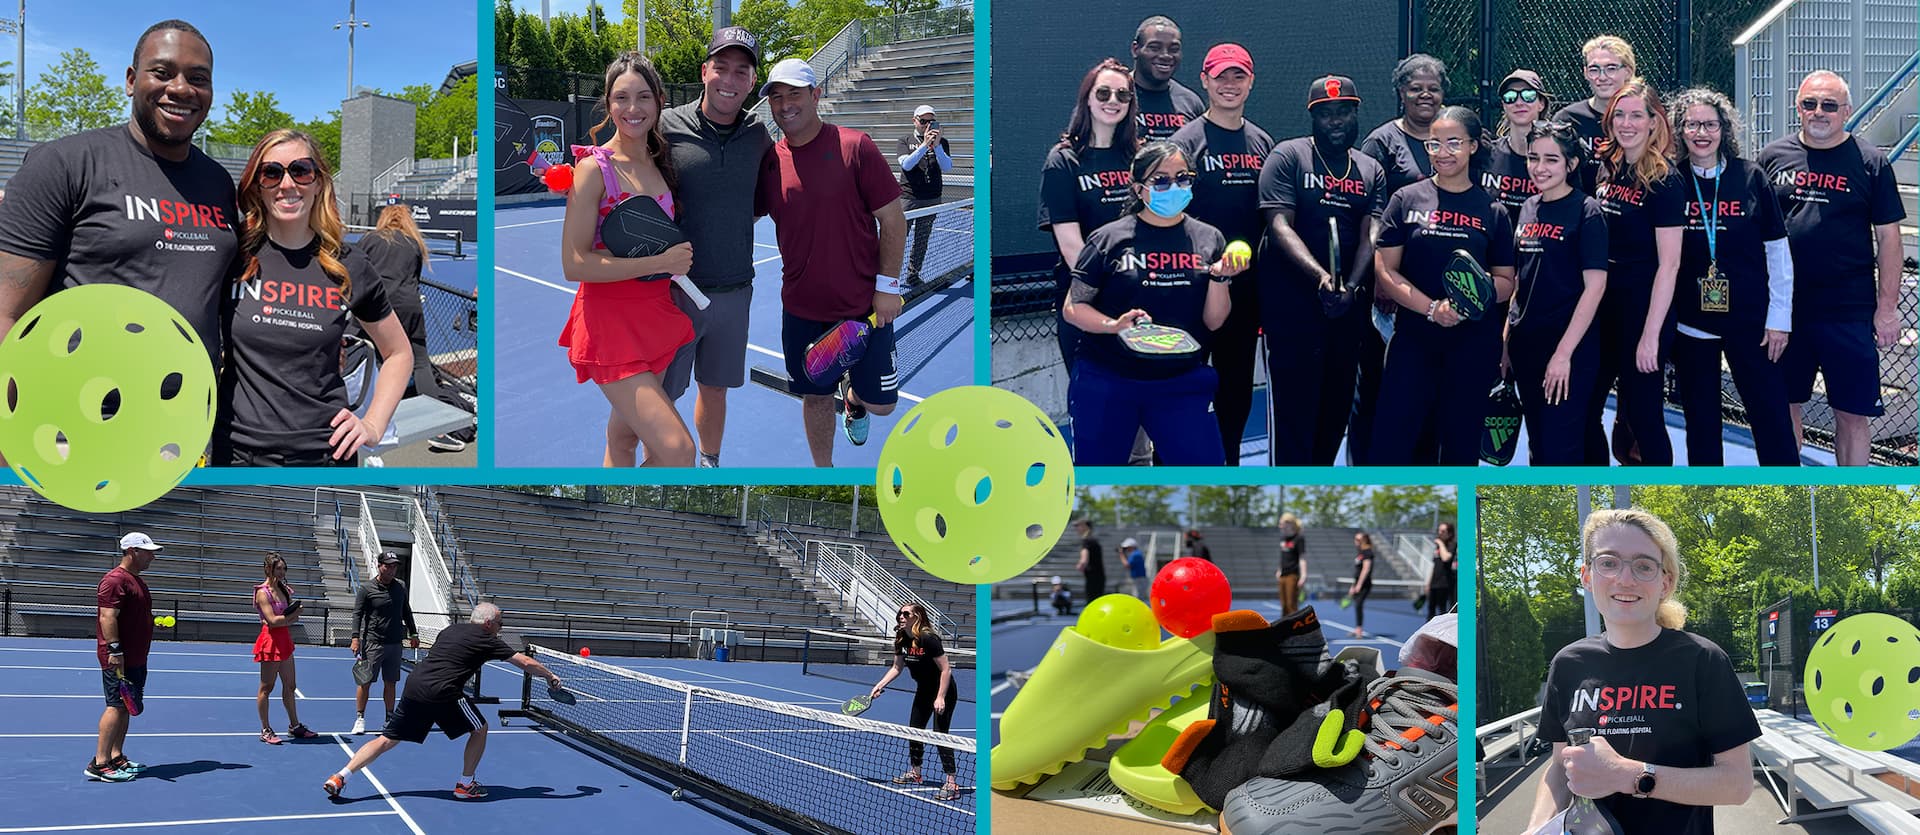 montage of images from pickleball event